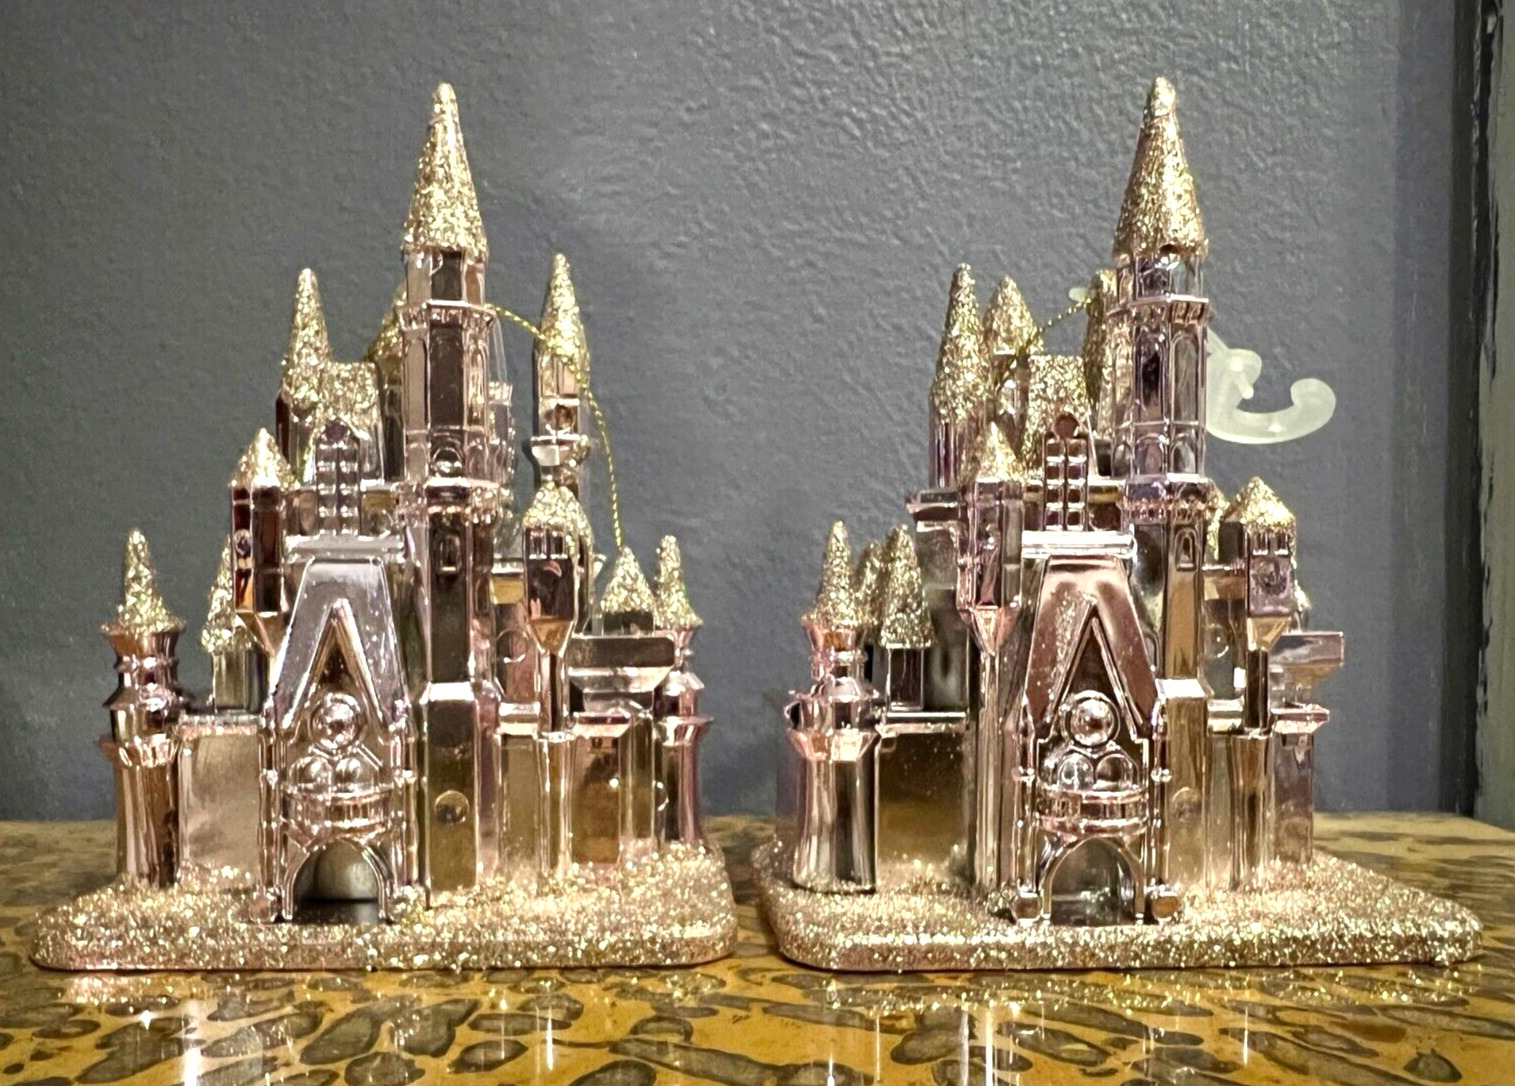 New - 2 CASTLE ORNAMENTS inspired by Theme Park Fairy Tale Castles - PINK & GOLD